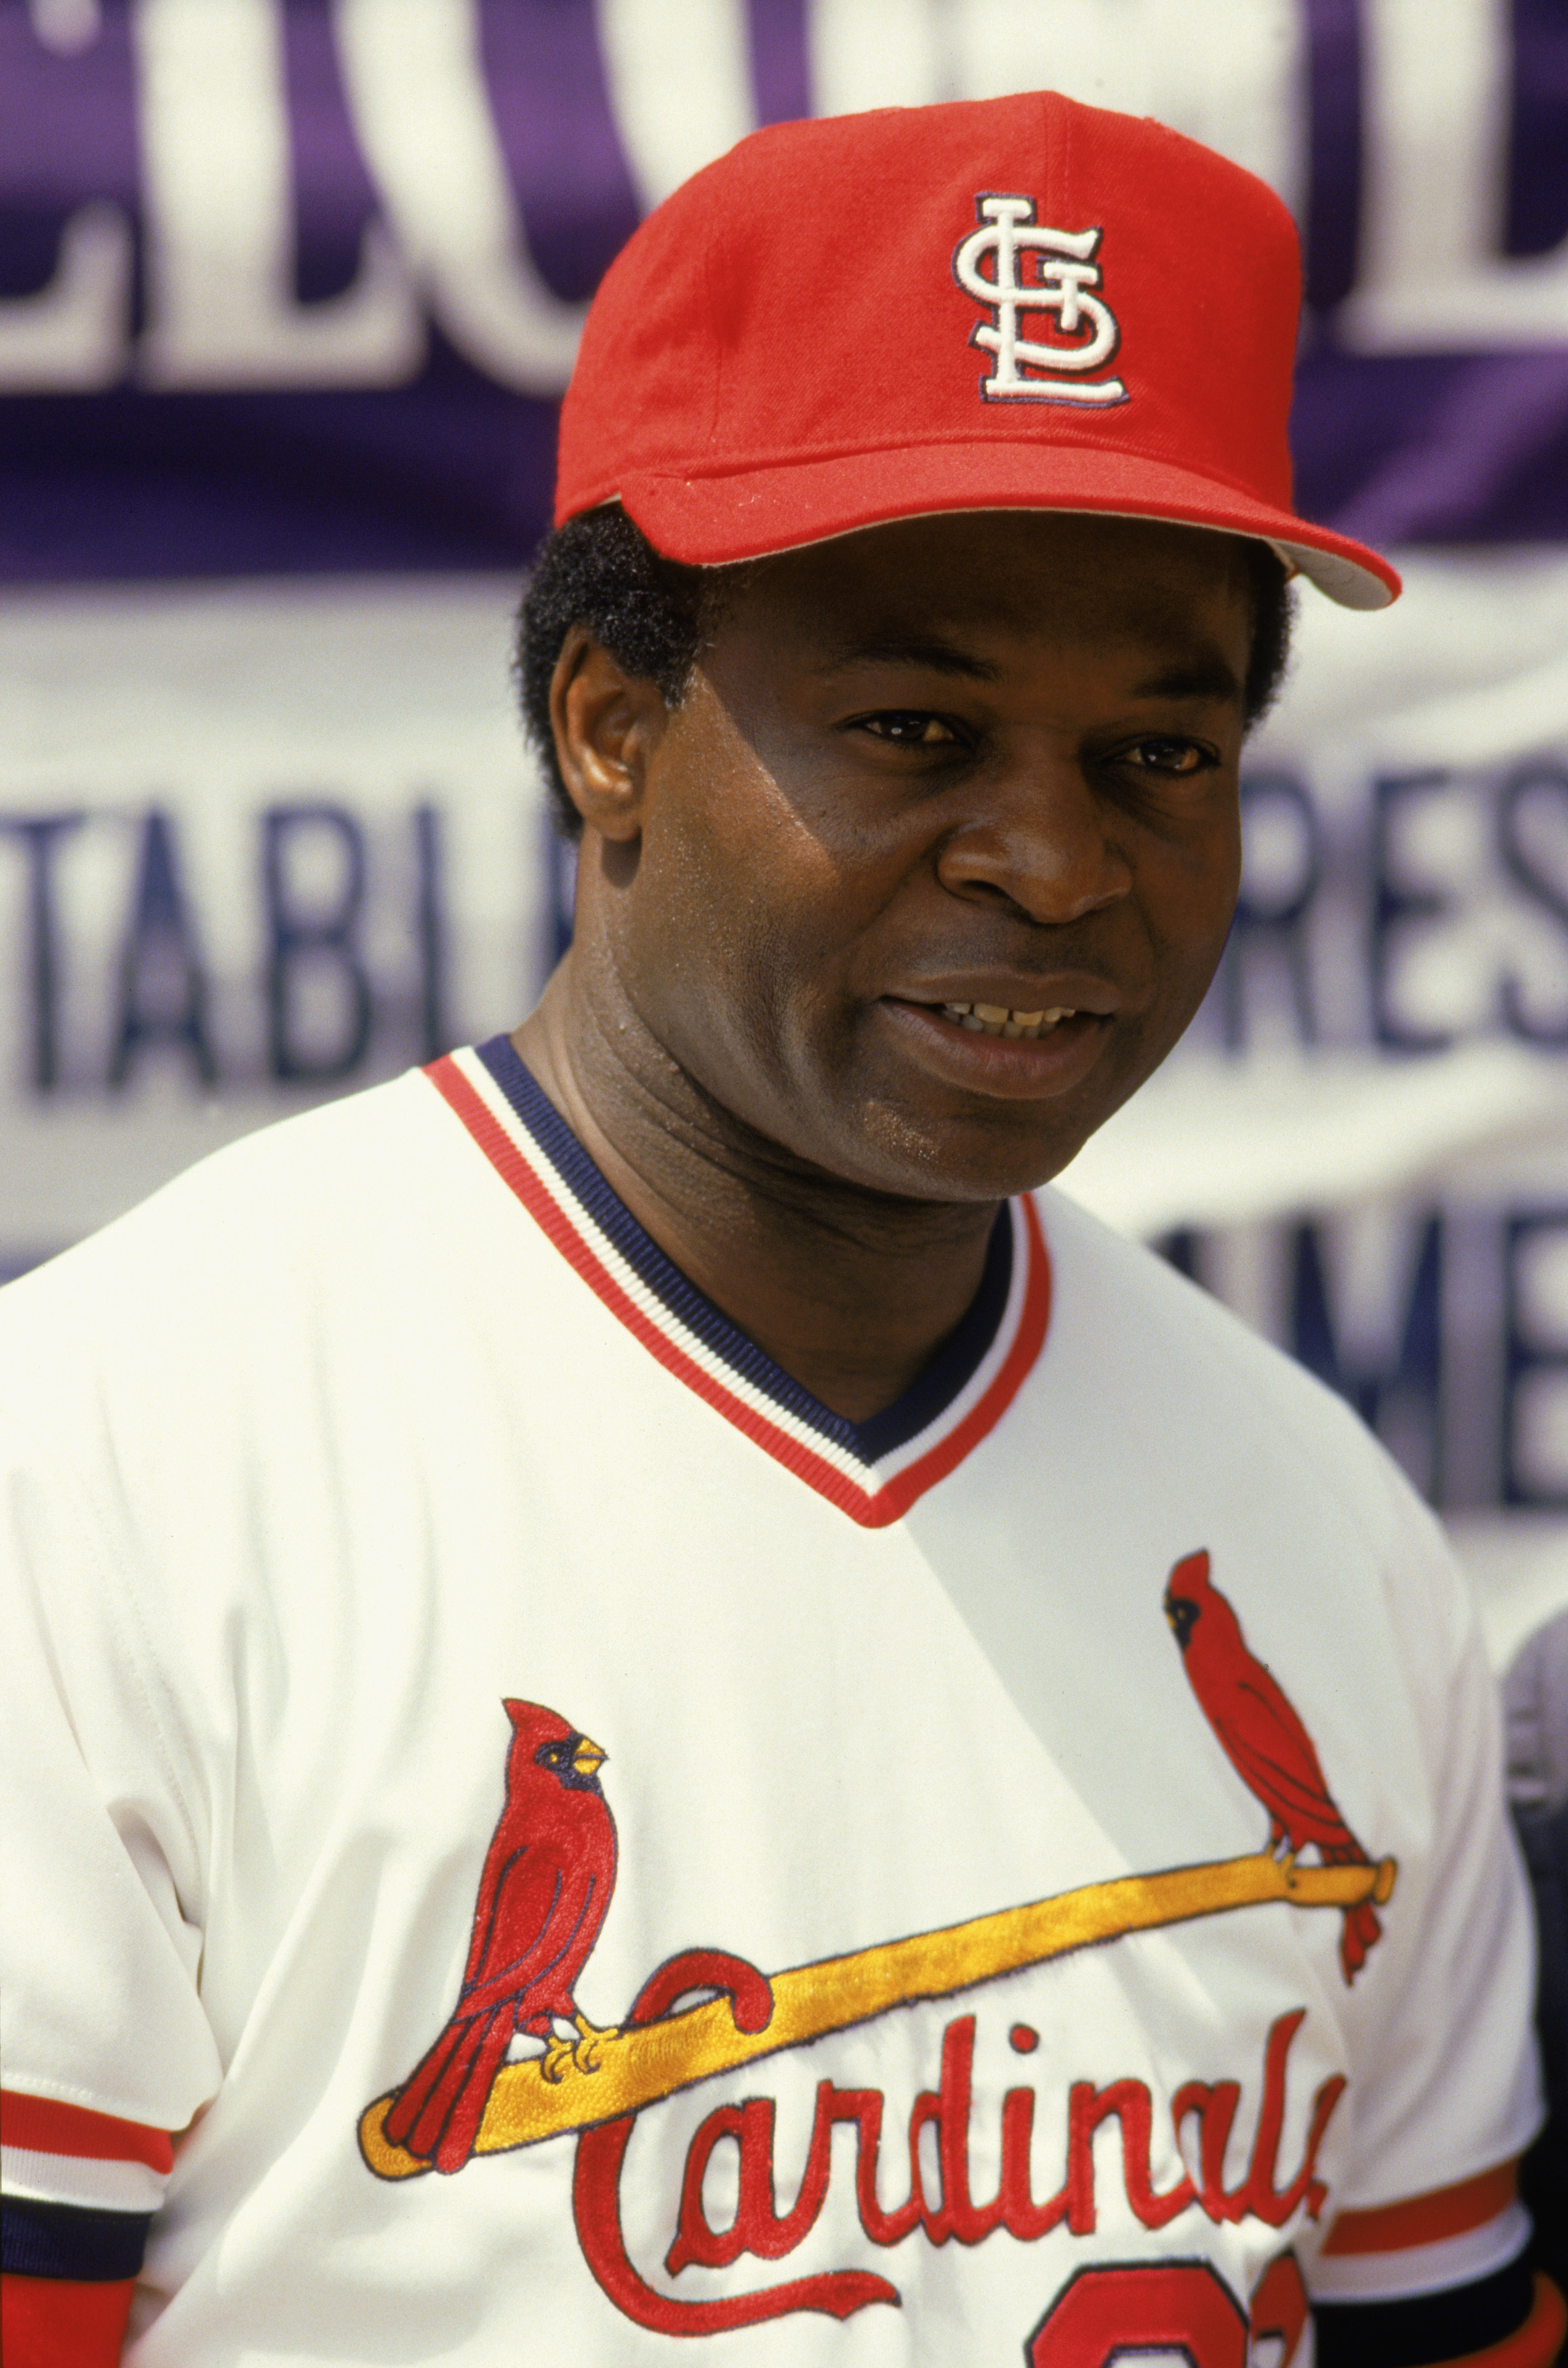 1986:  Former St. Louis Cardinal player Lou Brock '64-'79,  looks on in a game during the 1986 season. (Photo by: Stephen Dunn/Getty Images)